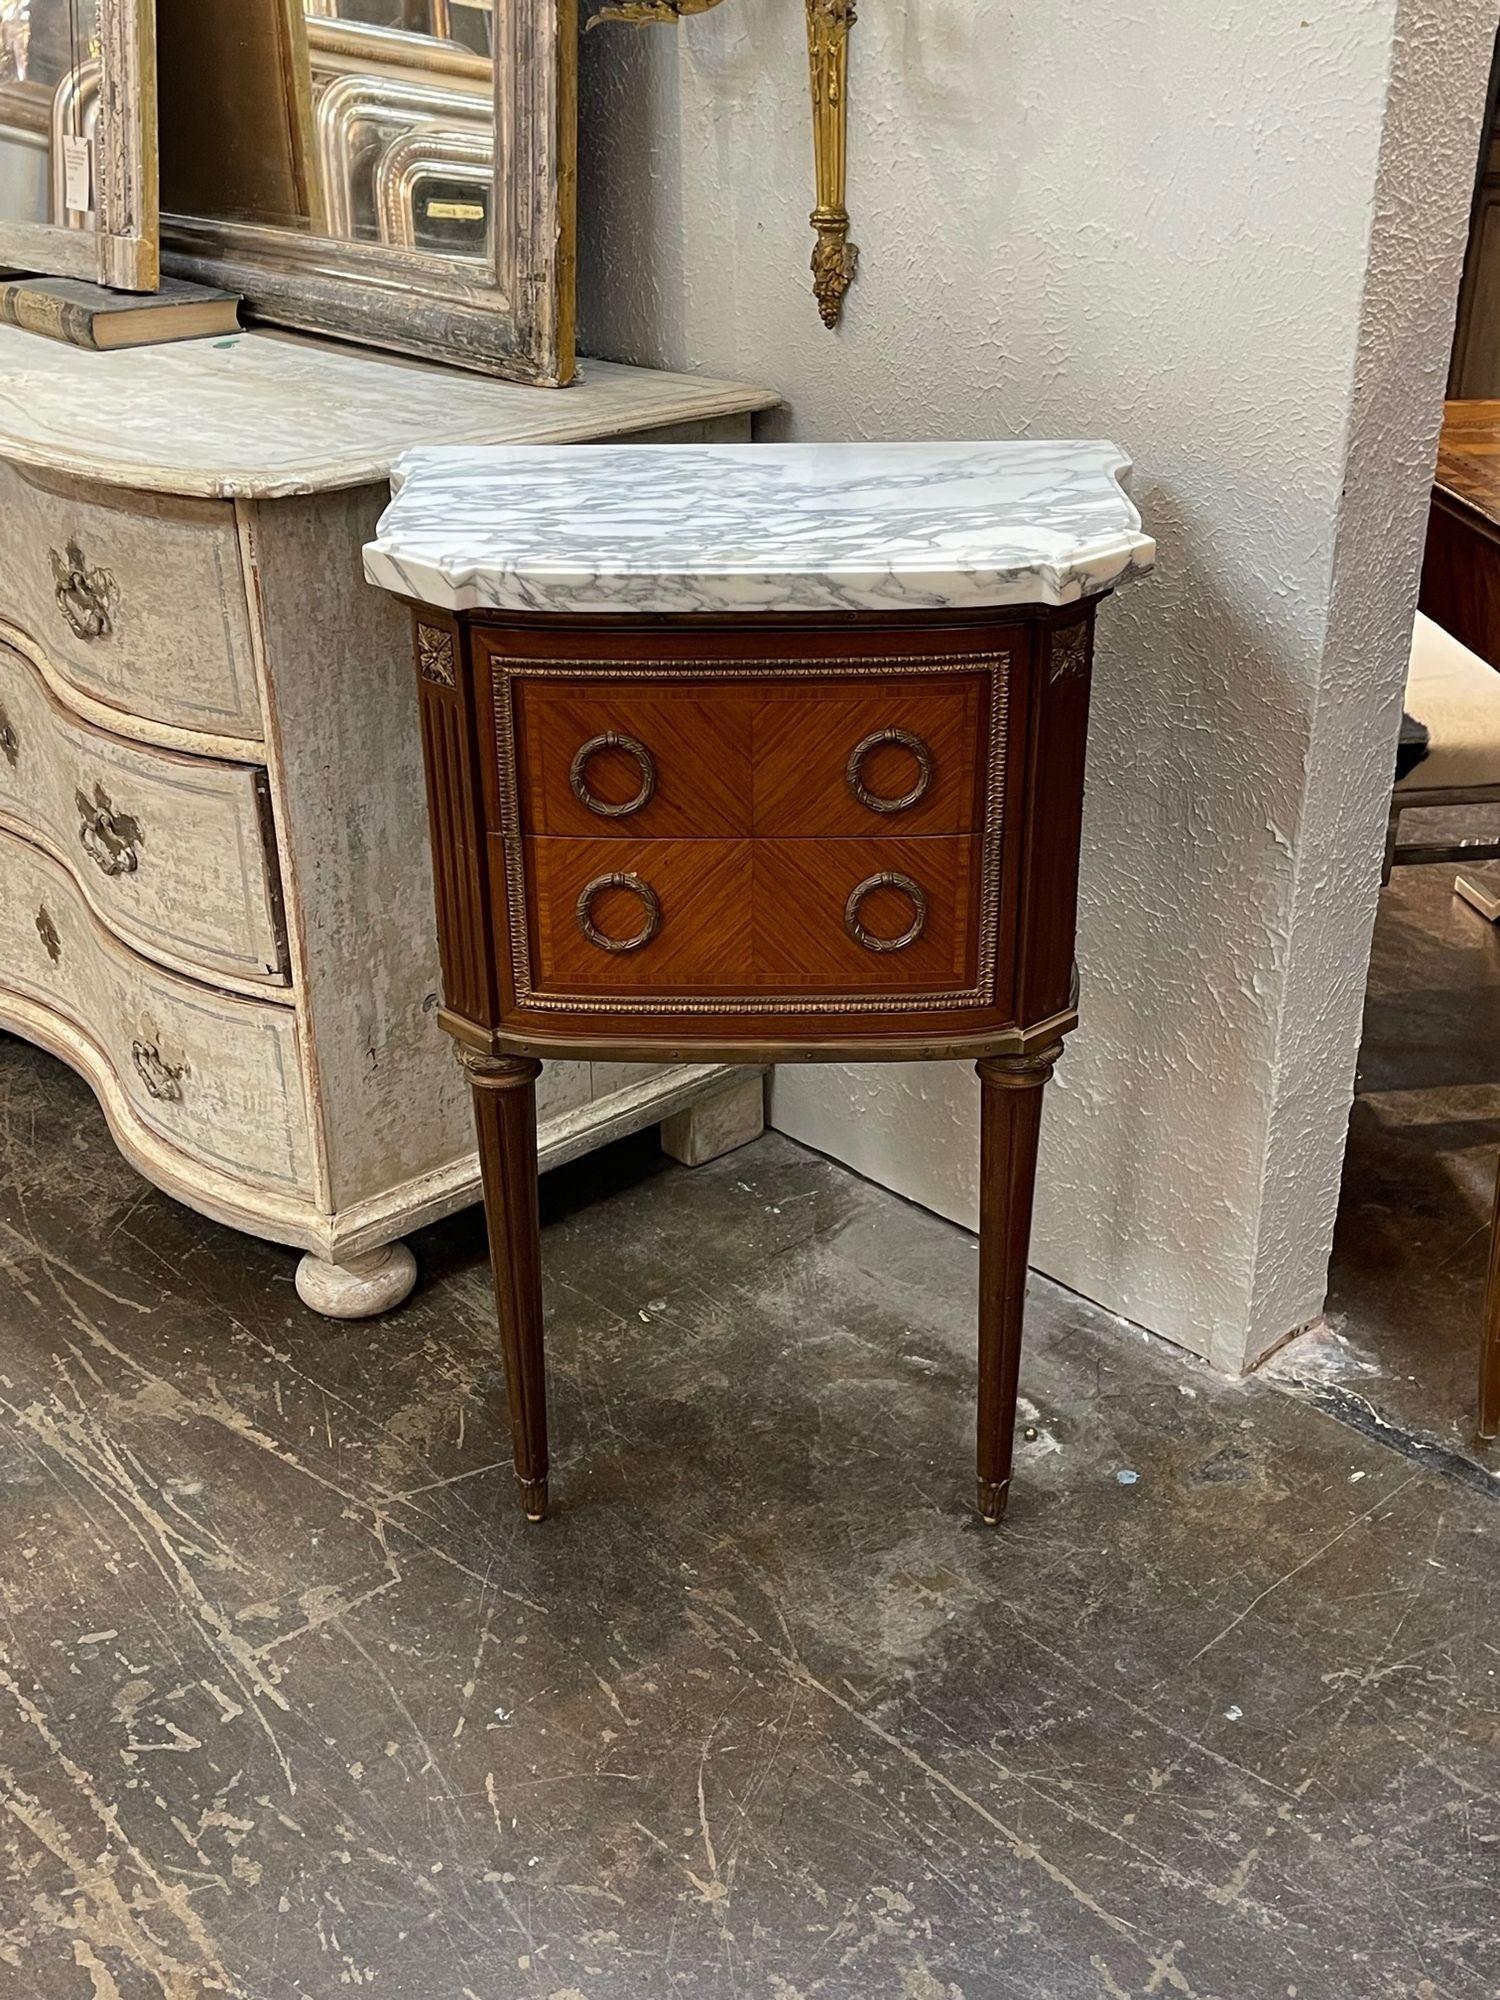 Handsome 19th century French Louis XVI style mahogany and bronze side table. The piece has very pretty hardware and a marble top. A great accent piece that adds an upscale look!